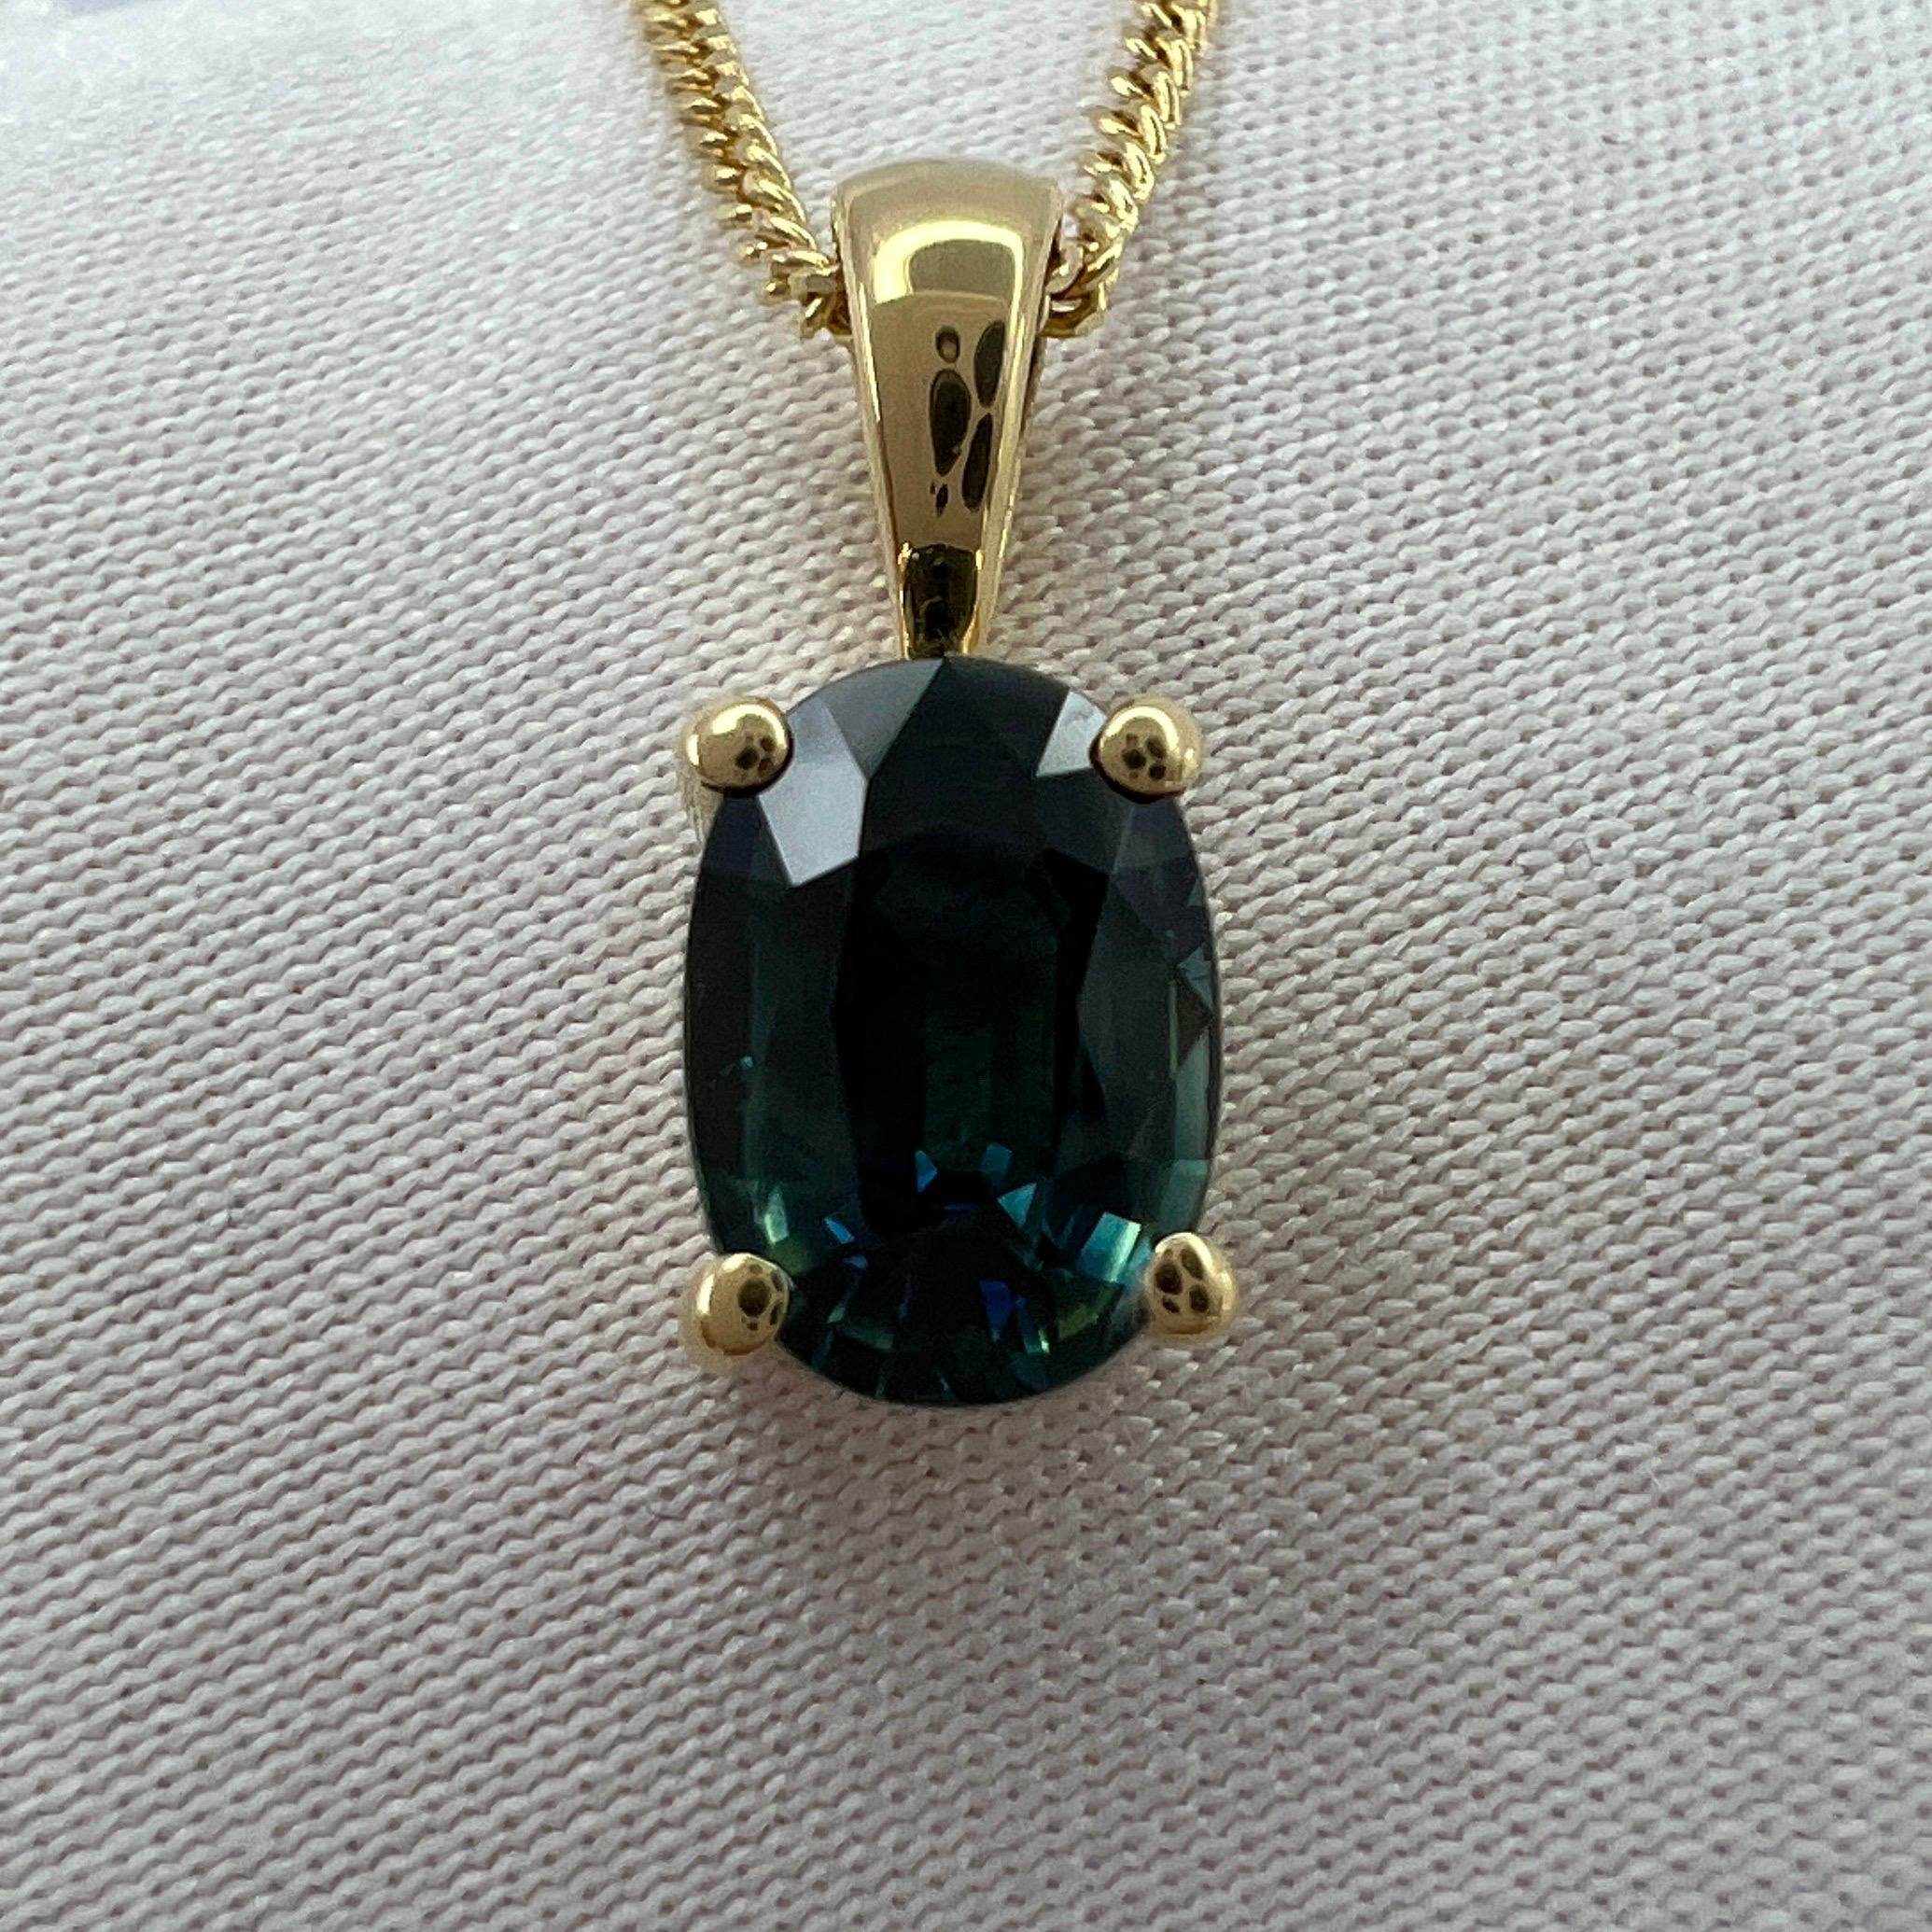 Deep Green Blue Untreated Australian Sapphire 18k Yellow Gold Solitaire Pendant.

1.01 Carat sapphire with a deep green blue teal colour and very good clarity. A clean stone. Also has an excellent oval cut. Measures 7x5mm.

Untreated and unheated